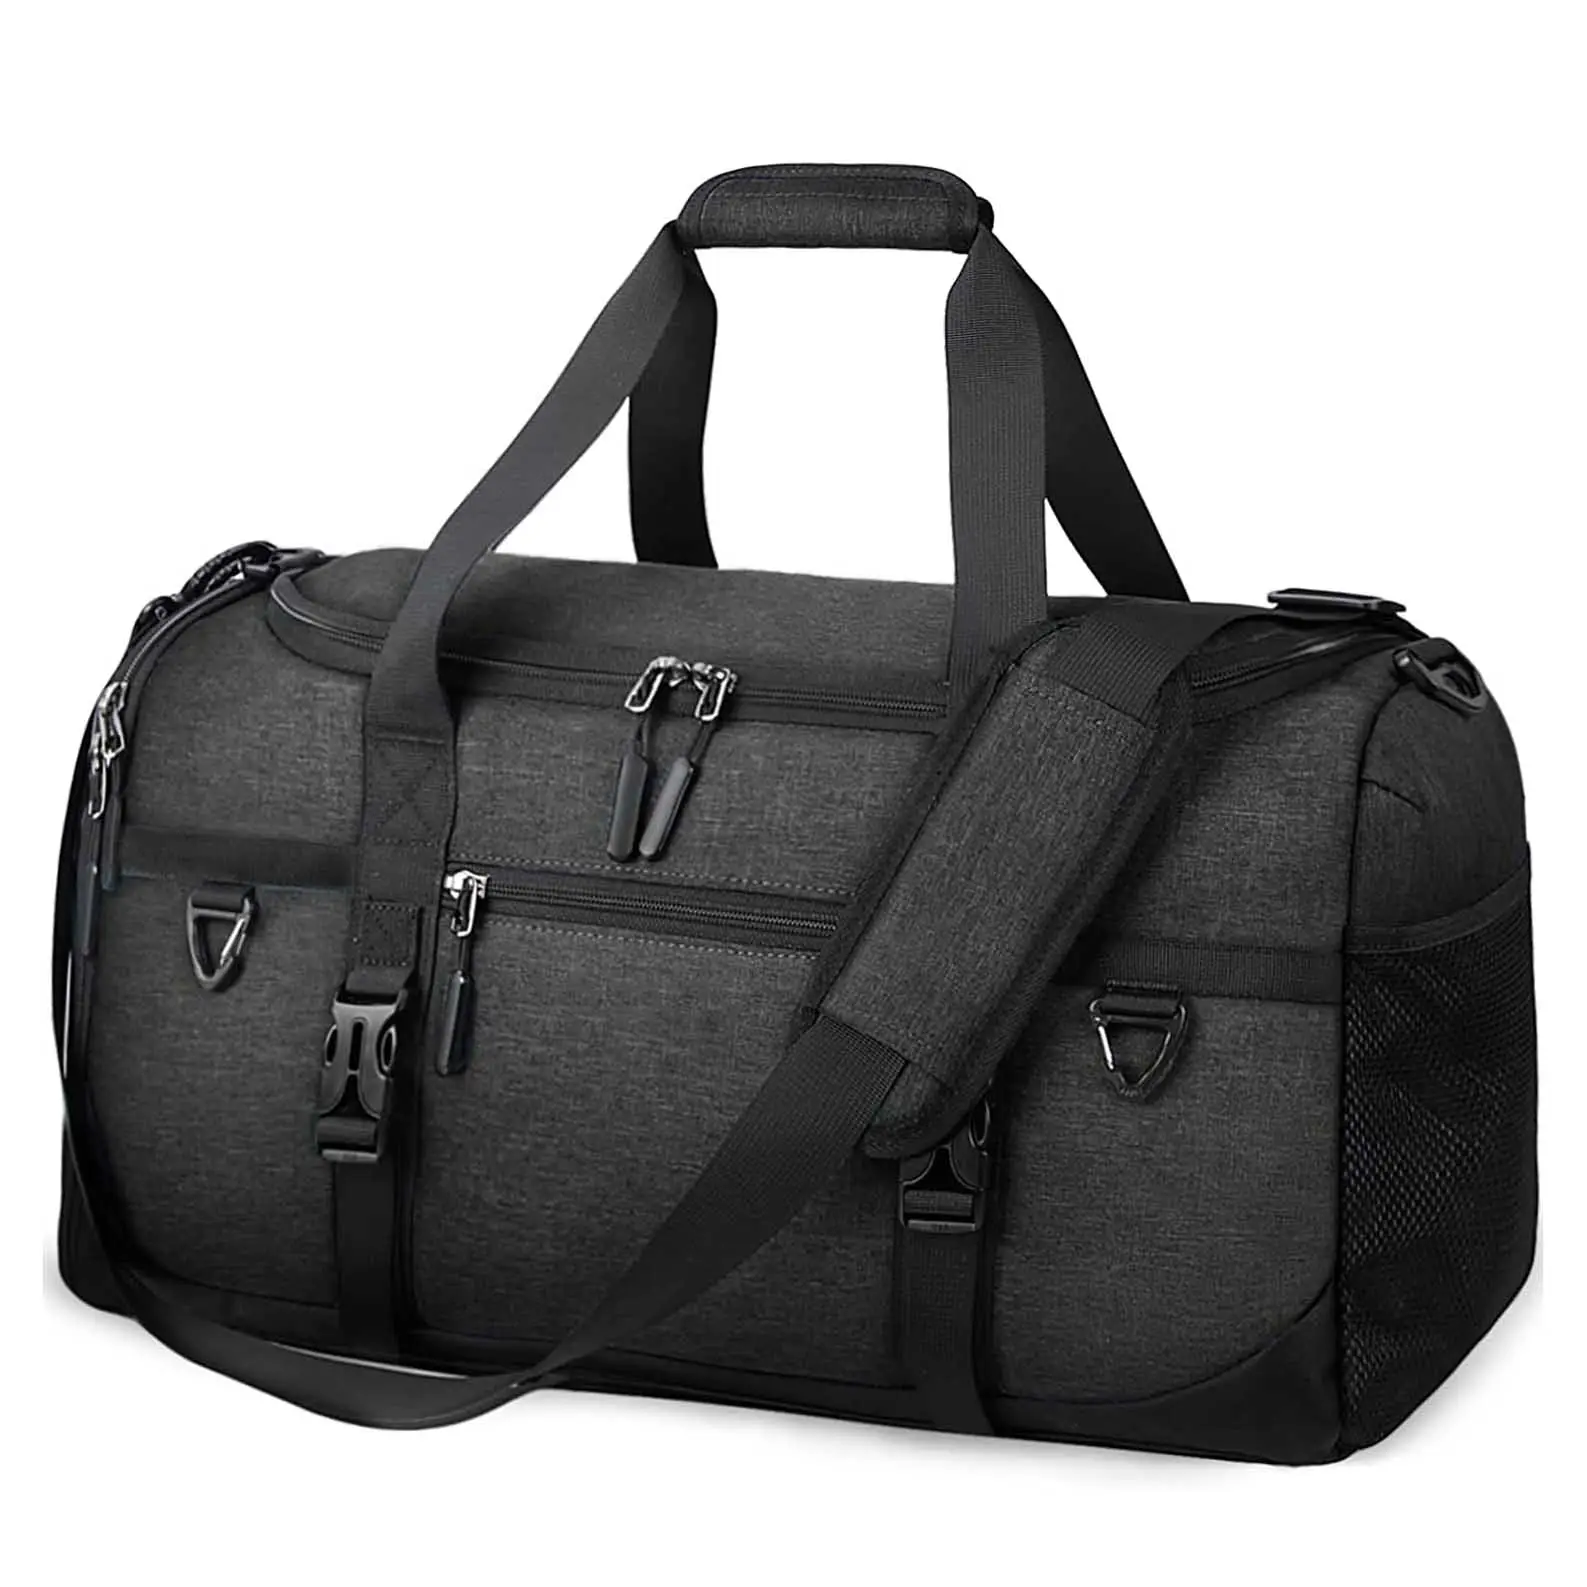 Custom Waterproof Large Weekender Overnight Bag Travel Sports Gym Duffel Bags with Shoes Compartment and Wet Pocket